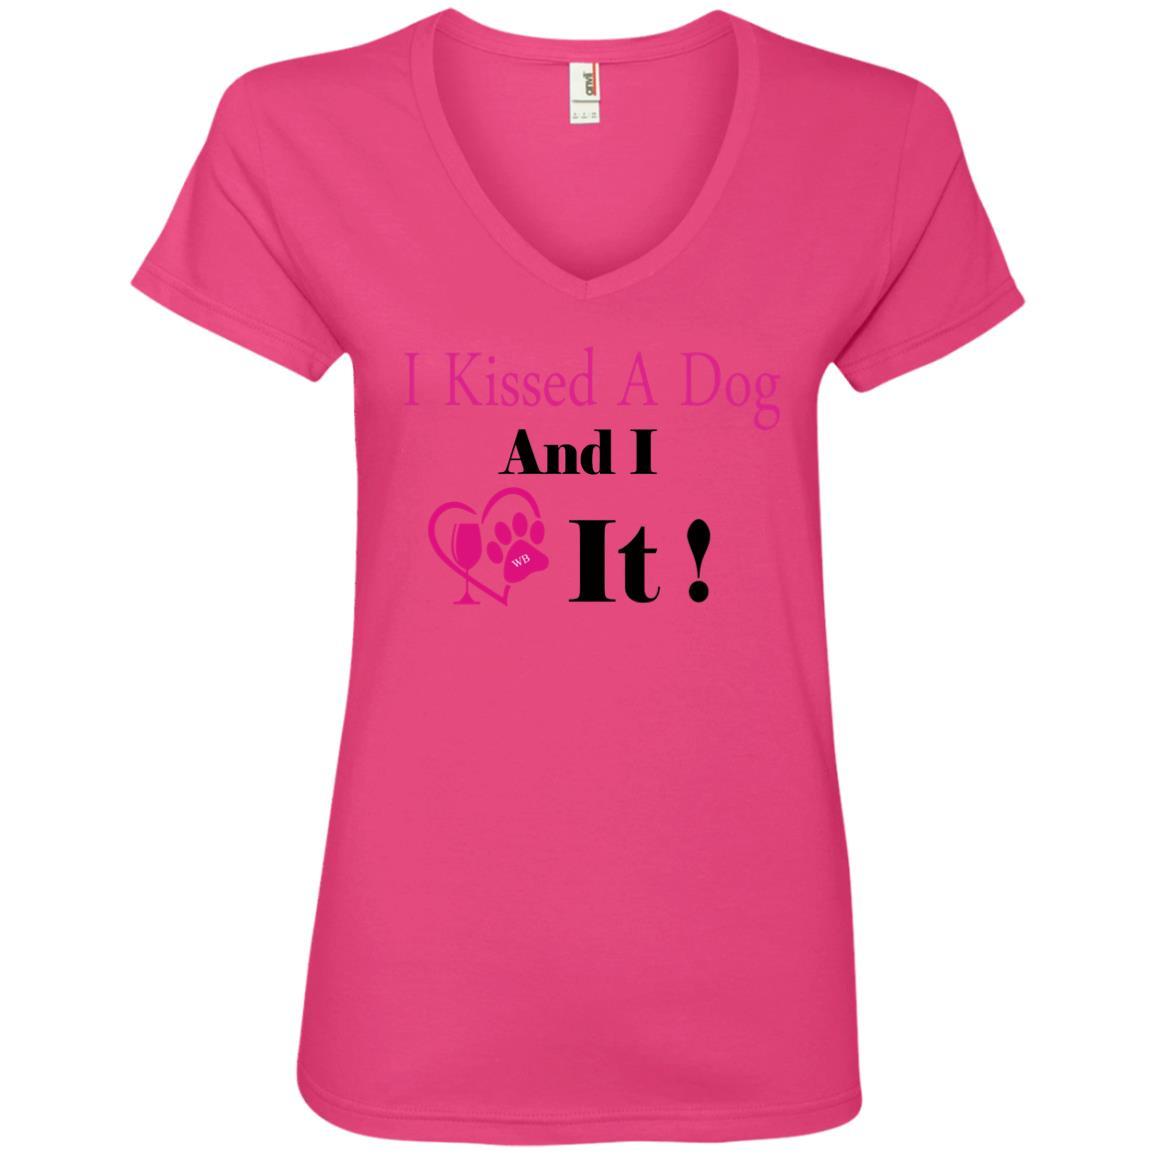 T-Shirts Hot Pink / S WineyBitches.co "I Kissed A Dog And I Loved It:" Ladies' V-Neck T-Shirt WineyBitchesCo